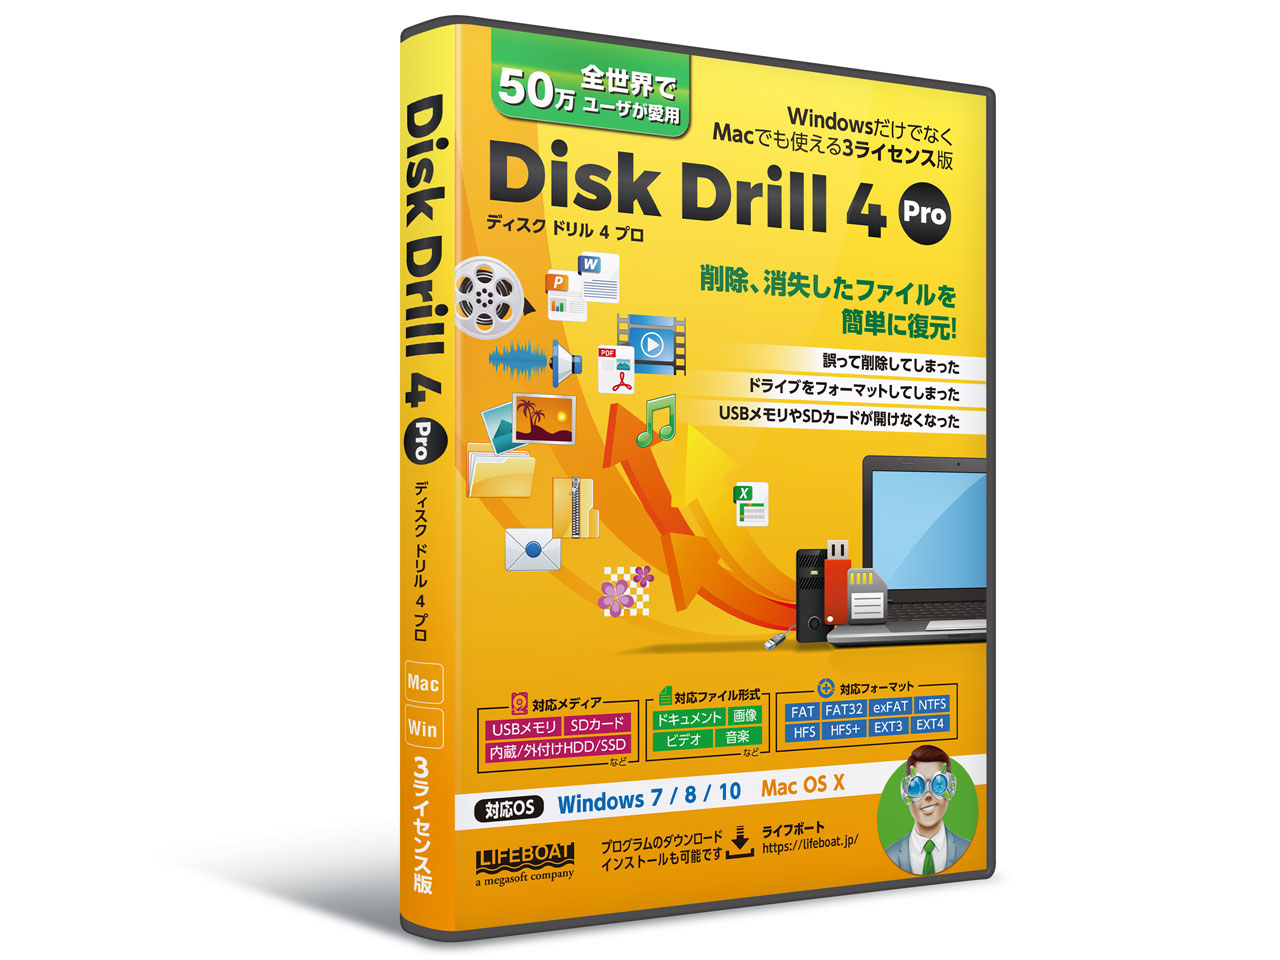 Disk Drill Pro 5.3.825.0 download the new